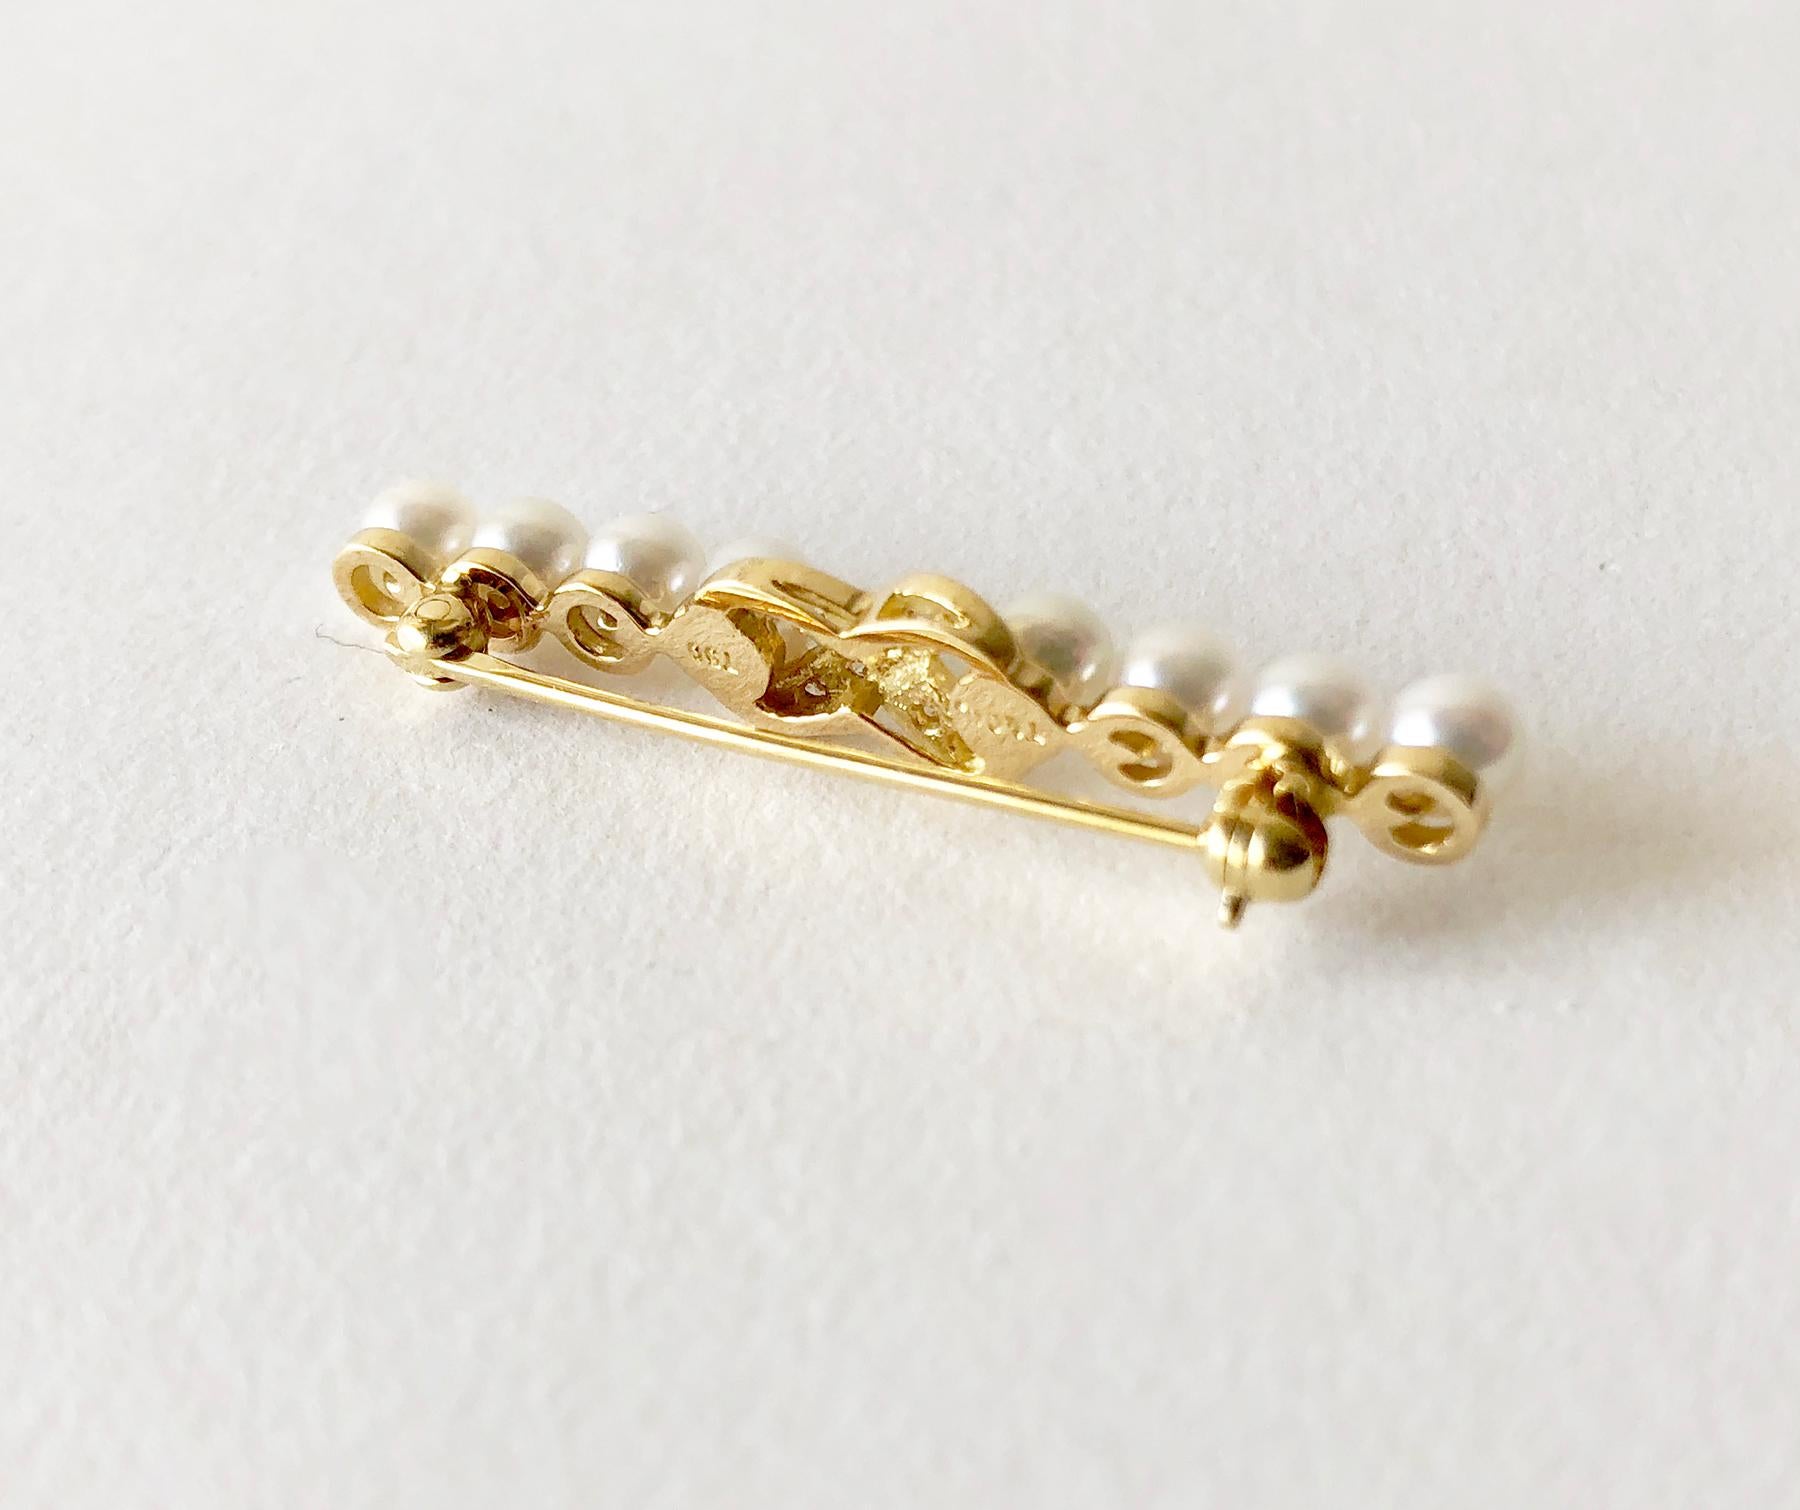 18K gold and diamond bar pin by Tiffany & Co. Brooch measures 1 1/2